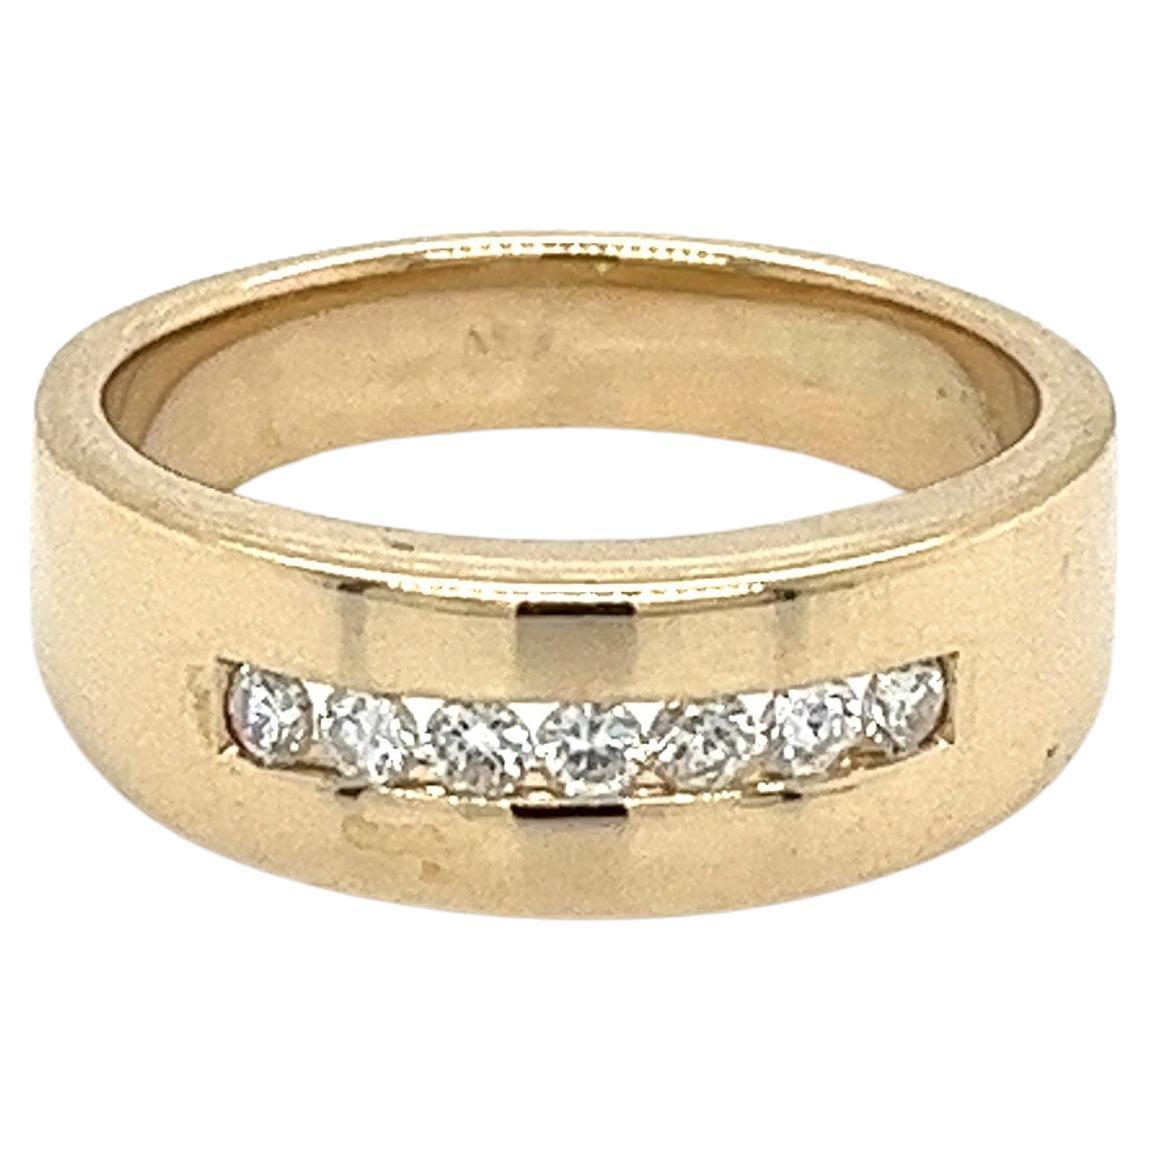 14k Solid Gold Channel Set Single Line Round Cut Diamond Band Ring